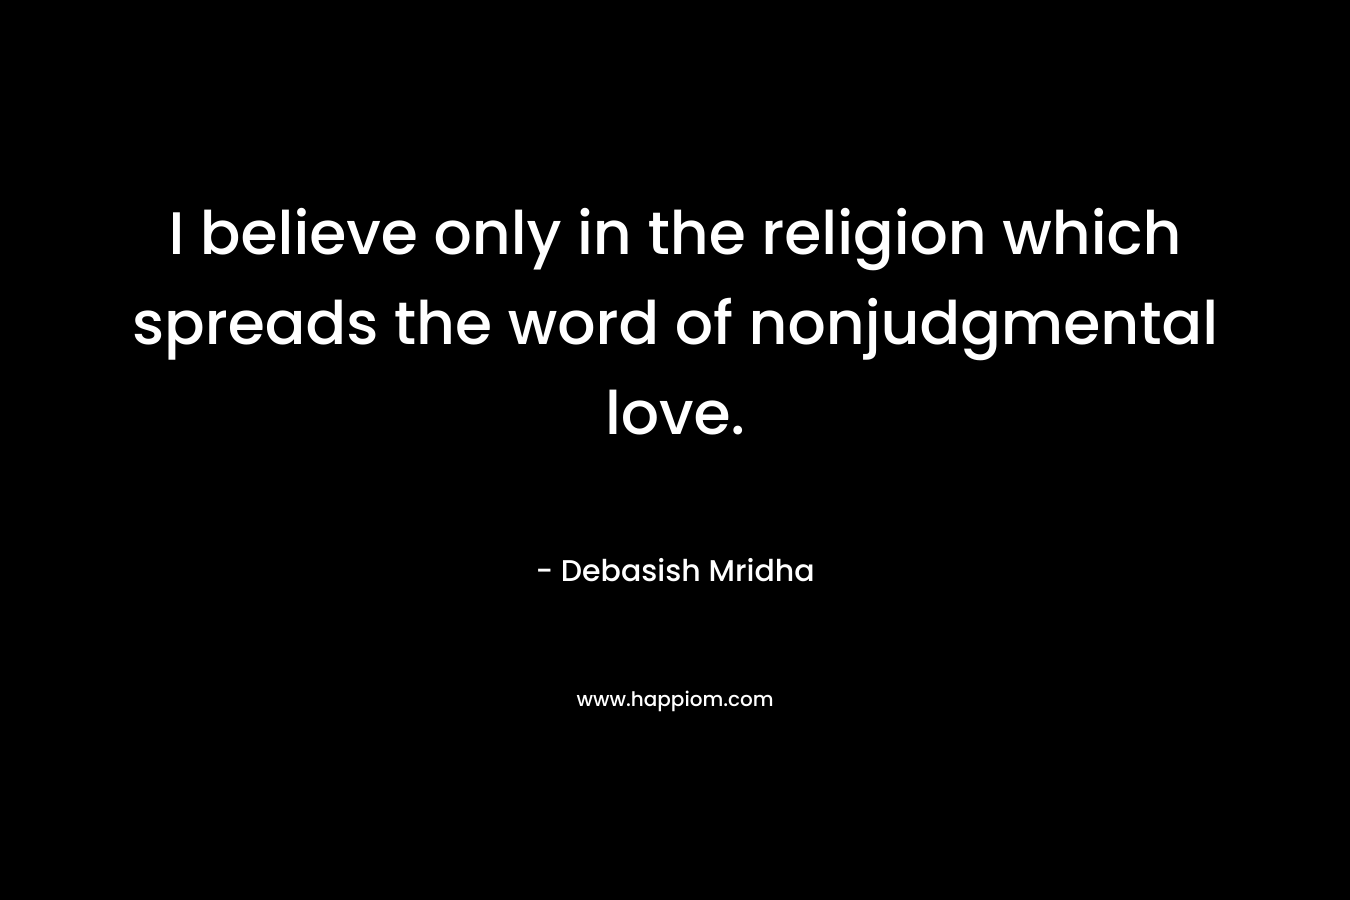 I believe only in the religion which spreads the word of nonjudgmental love.